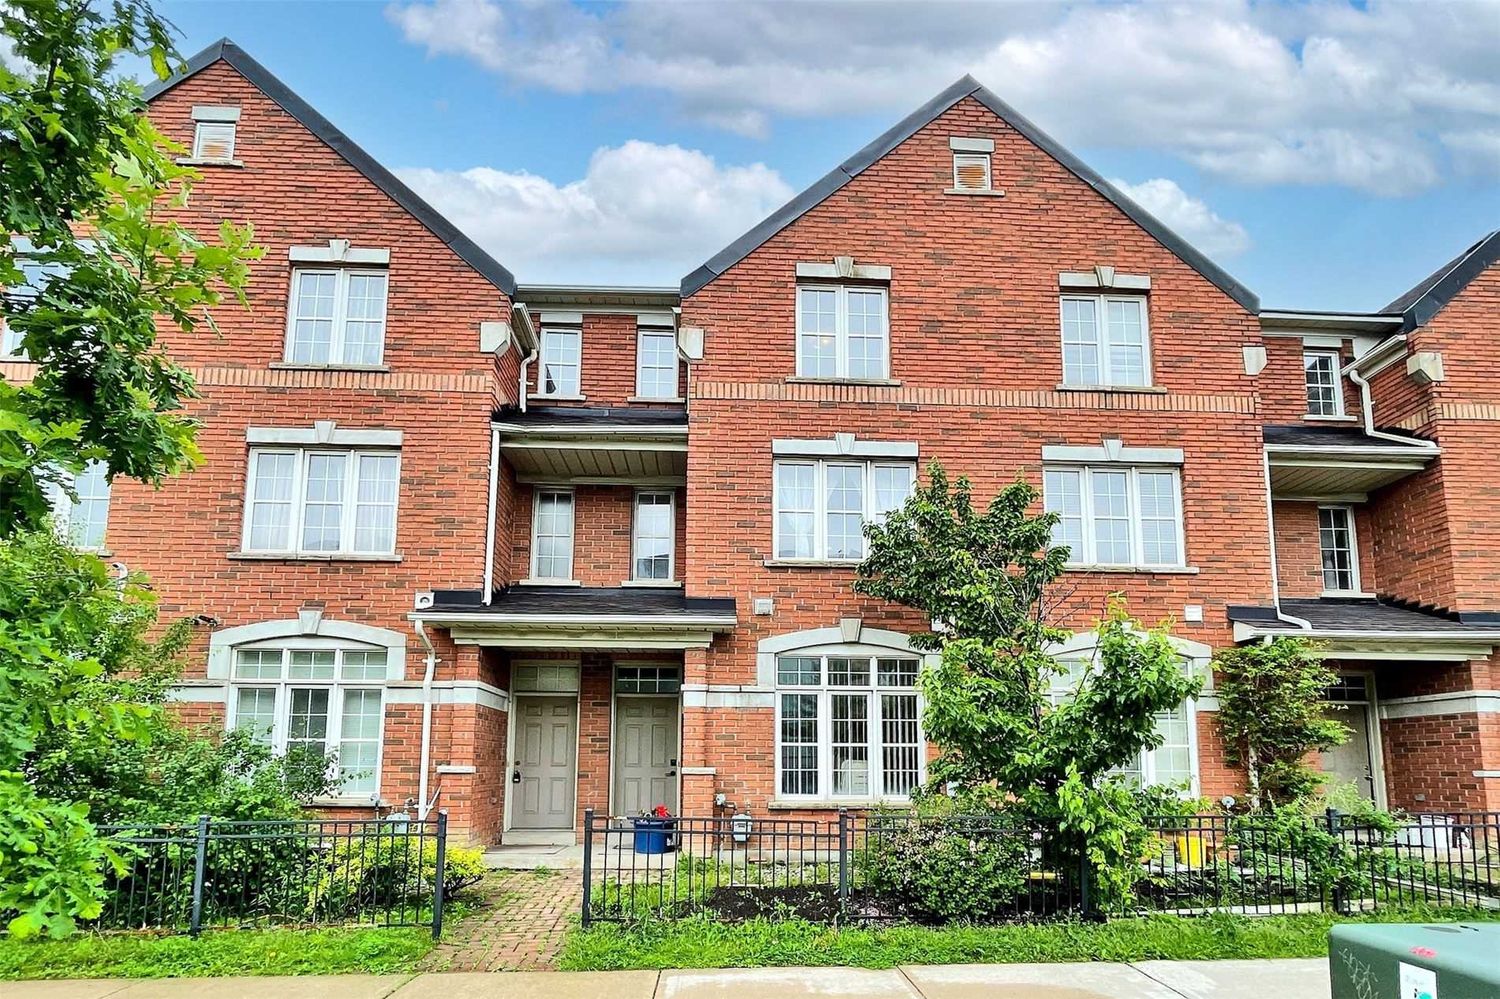 1-34 Woltner Way. Woltner & Nakina Way Townhomes is located in  Markham, Toronto - image #1 of 2